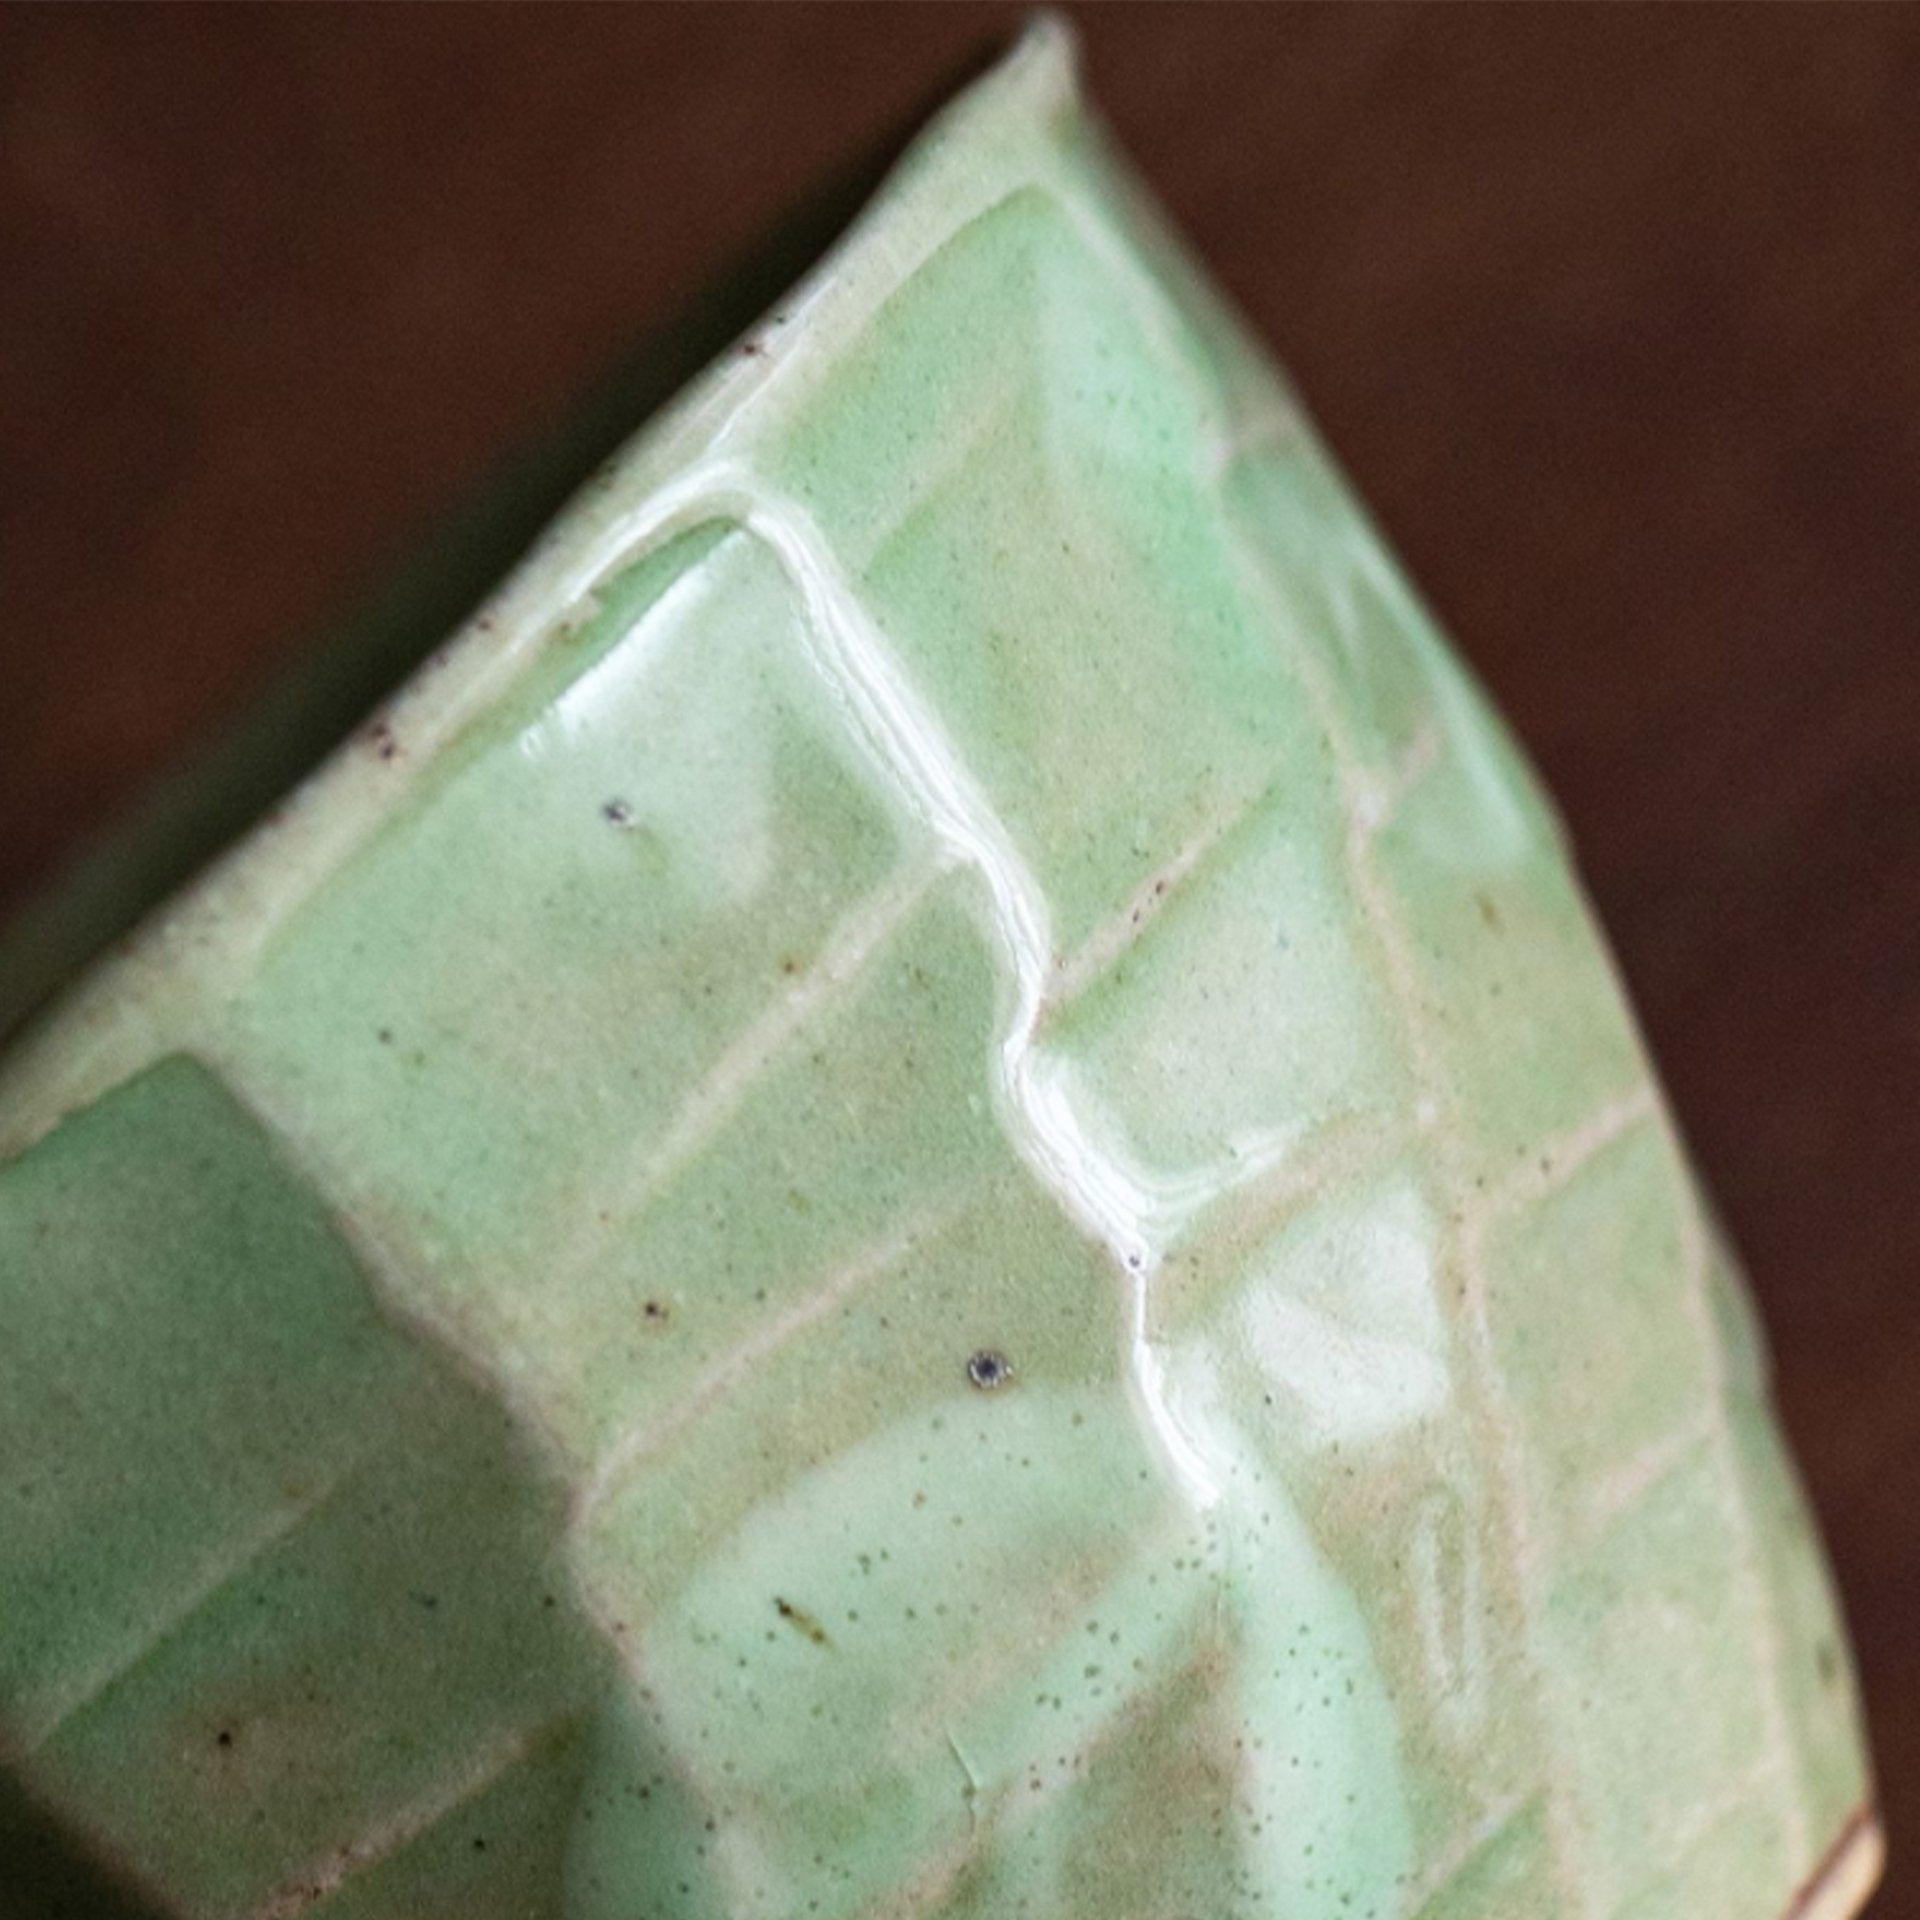 Close-up of a green glazed ceramic cup with geometric pattern